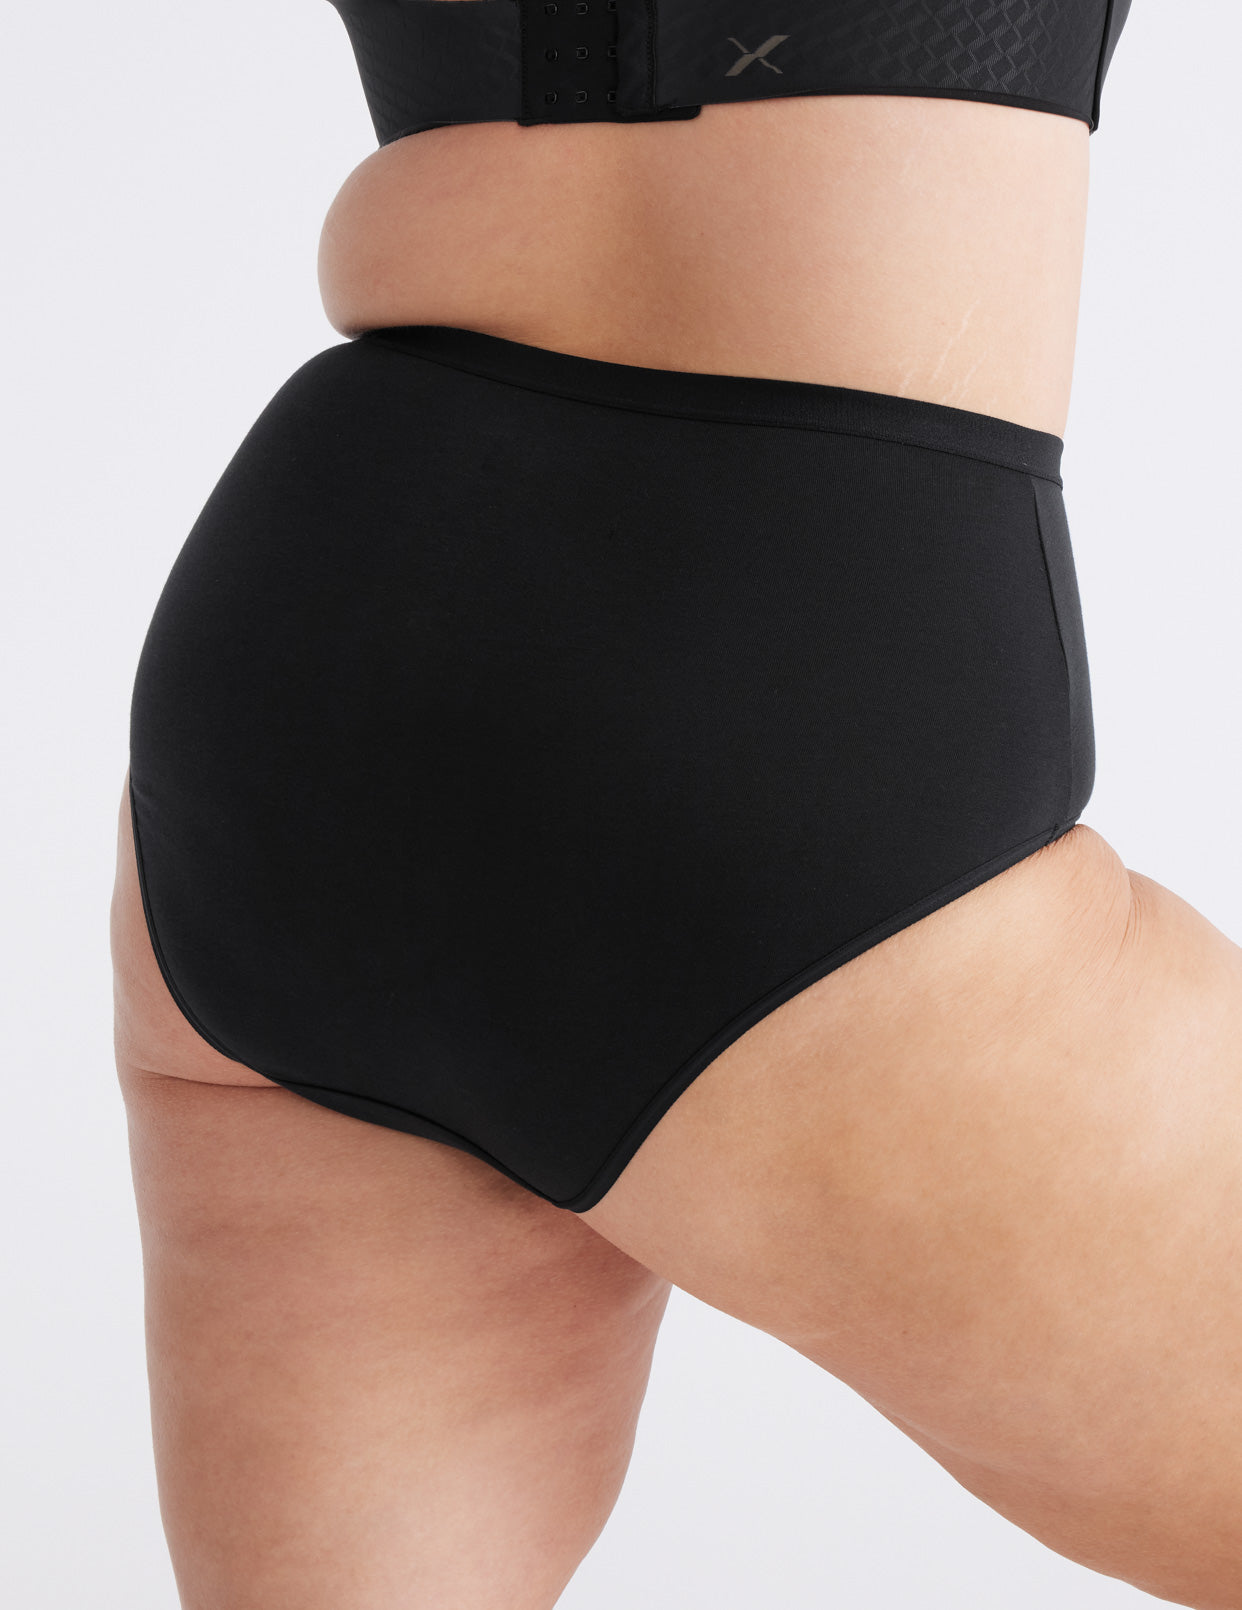 KnixWear Seamless Underwear for Women • The Fashionable Housewife